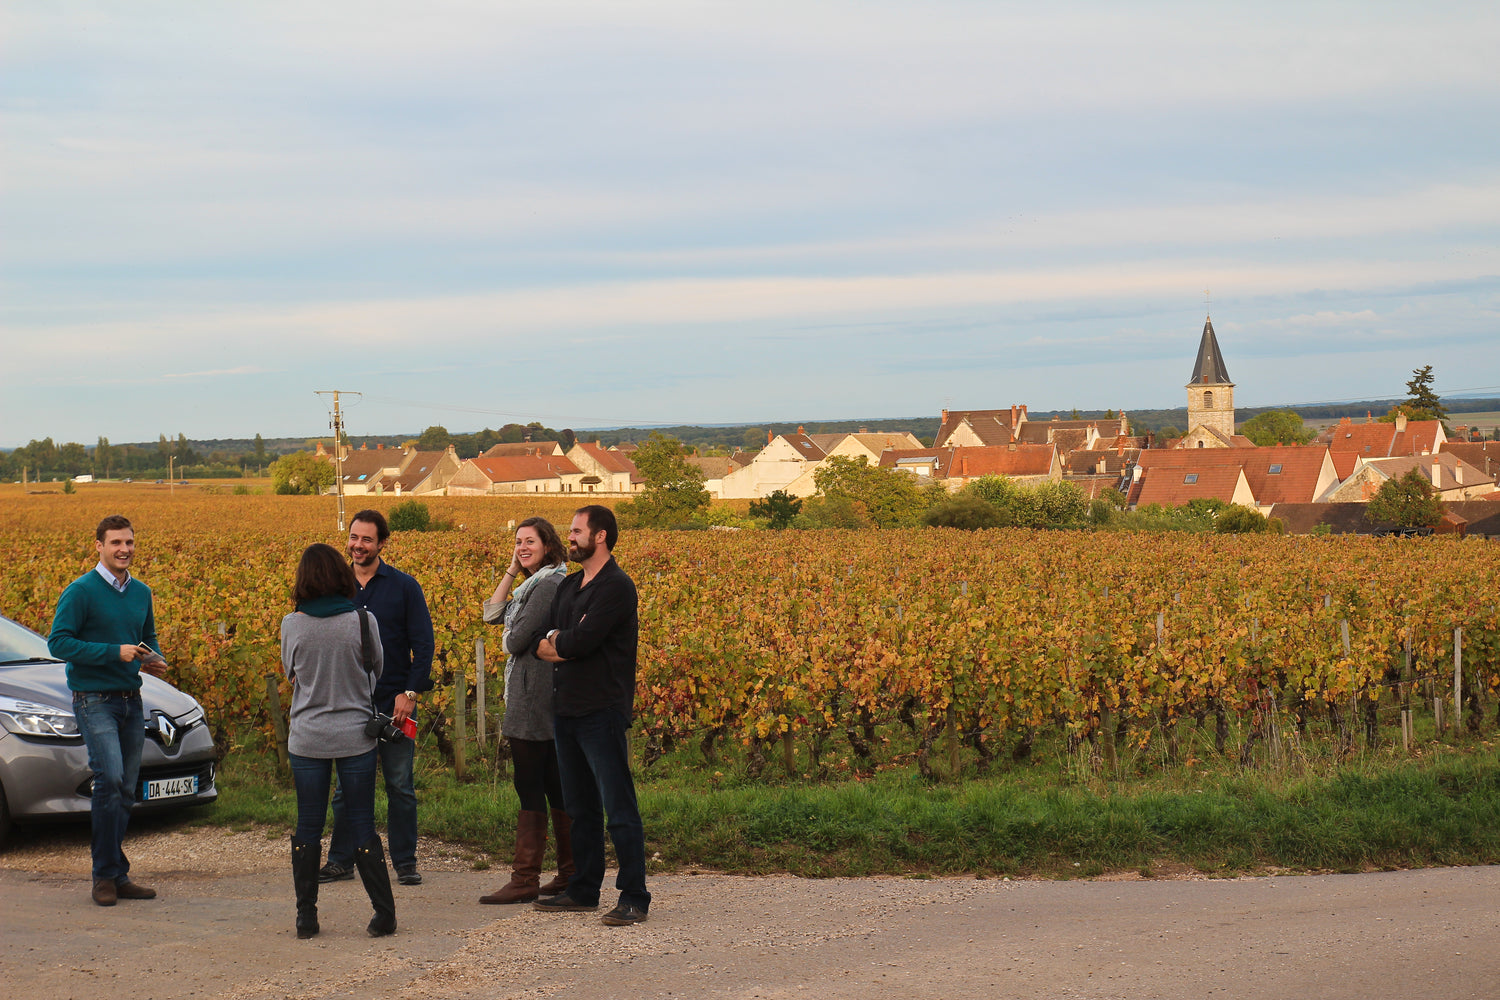 Walker's custom and private wine tours through Burgundy, France